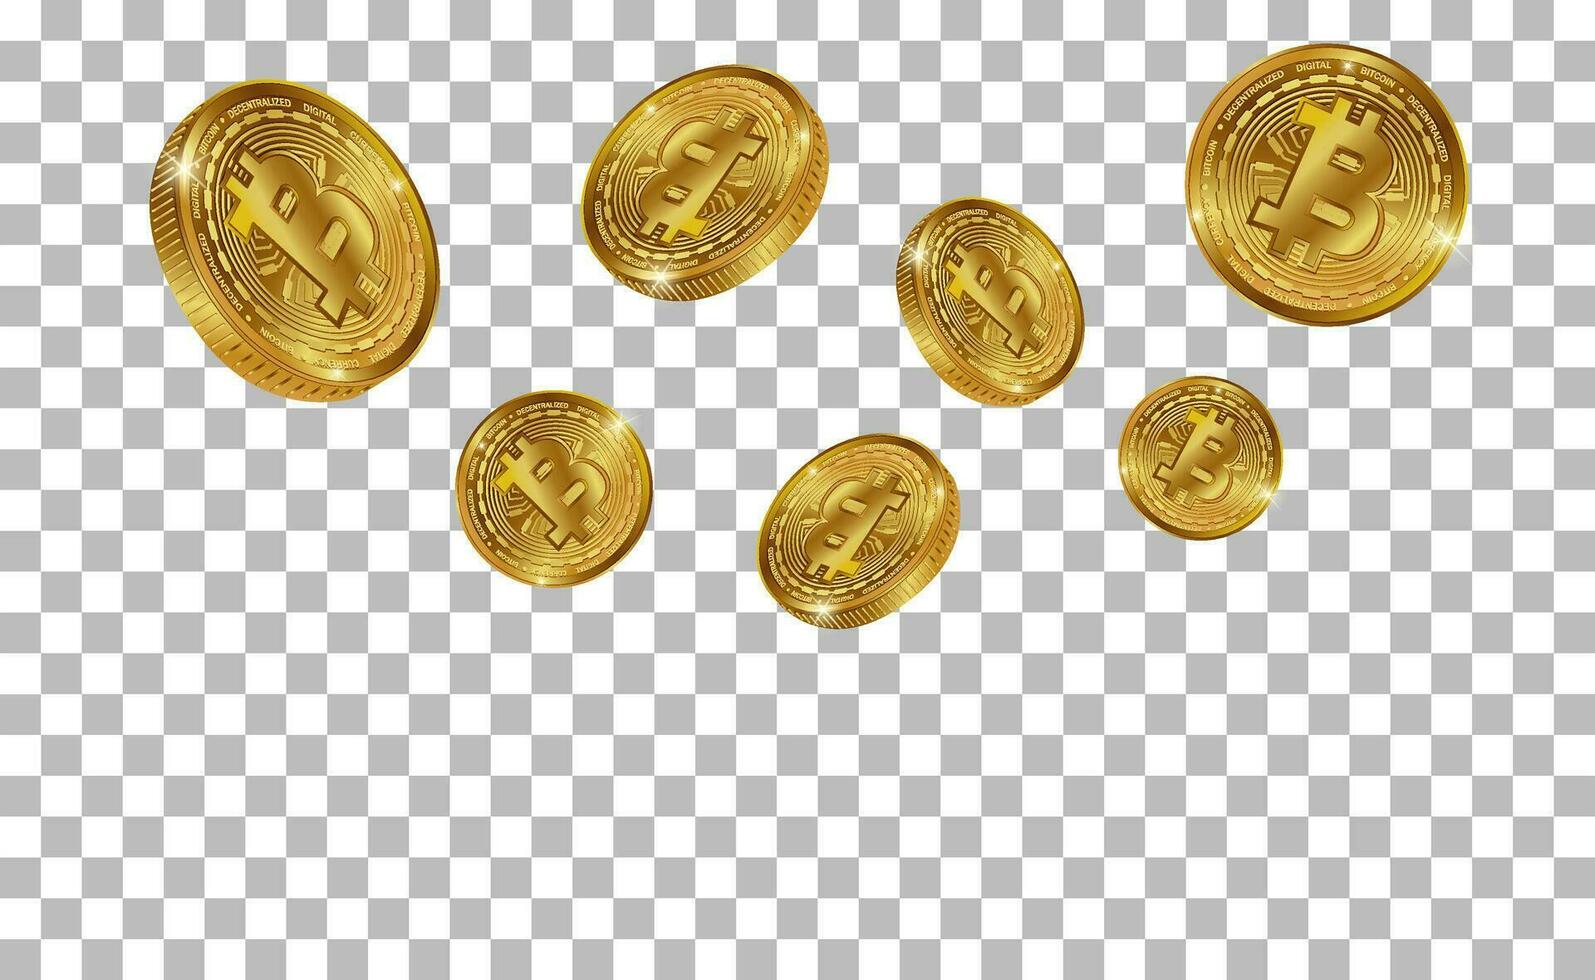 Bitcoin cryptocurrency symbols. Rain of 3d Golden coins, Digital money splash. Falling or flying money, digital currency payment, mining, finance concept. vector